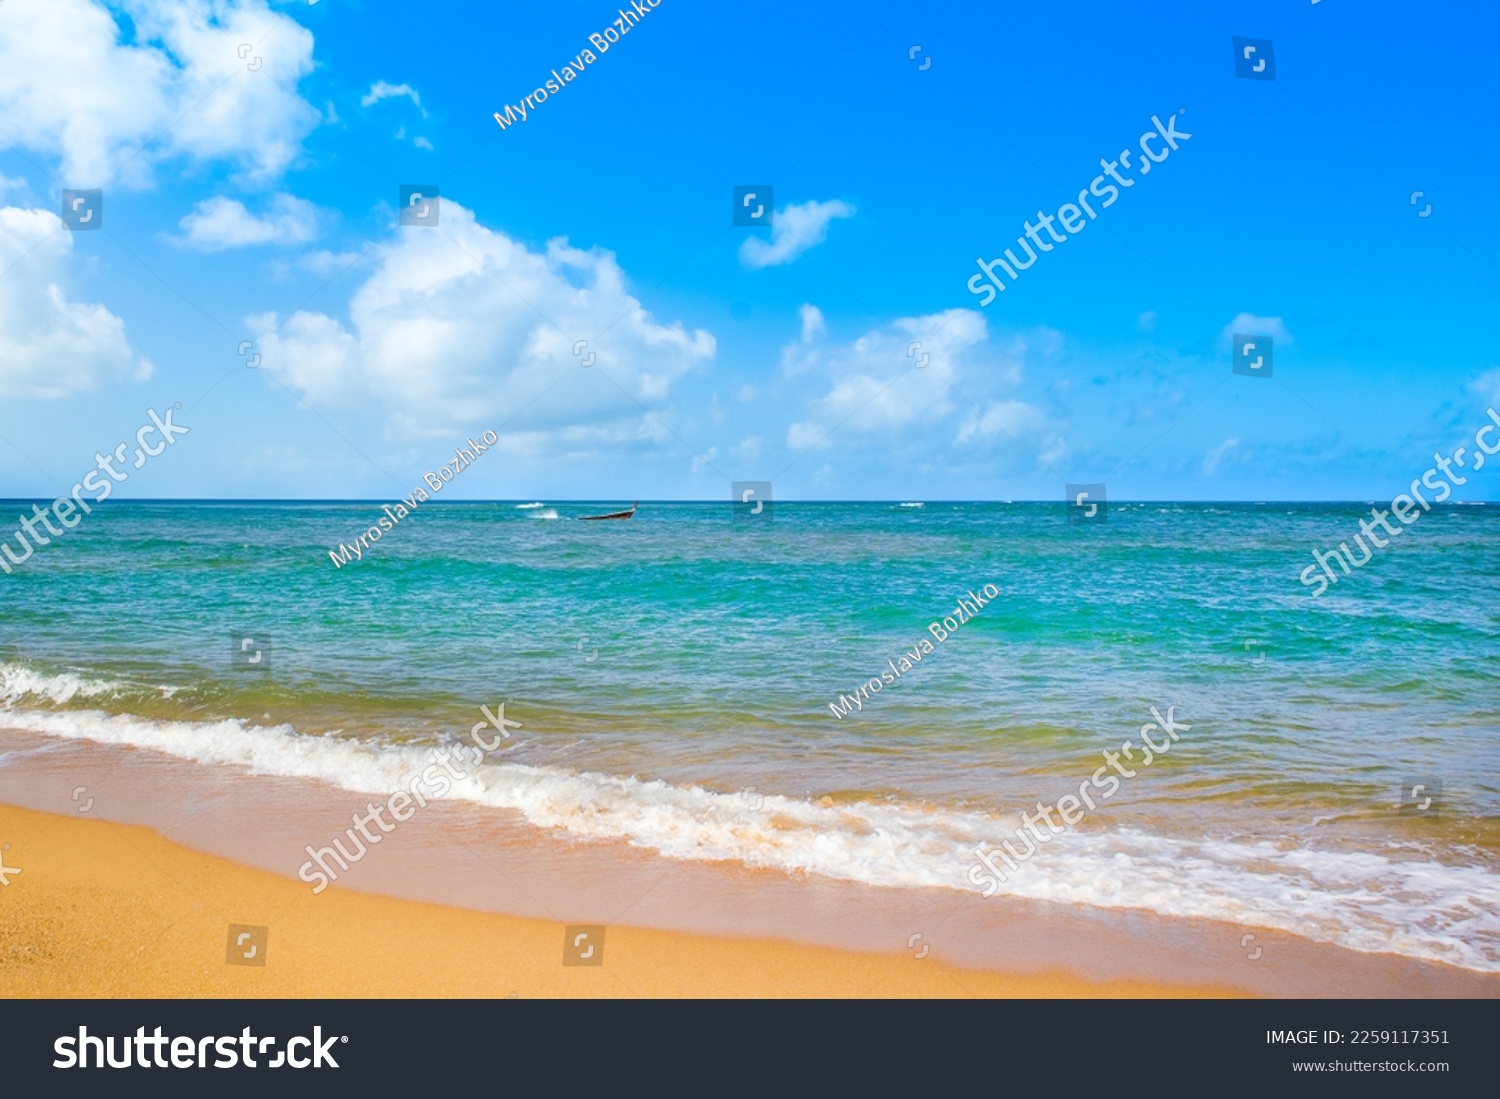 Beautiful landscape of the Indian Ocean coast with a sandy beach on the island of Phuket, Thailand #2259117351